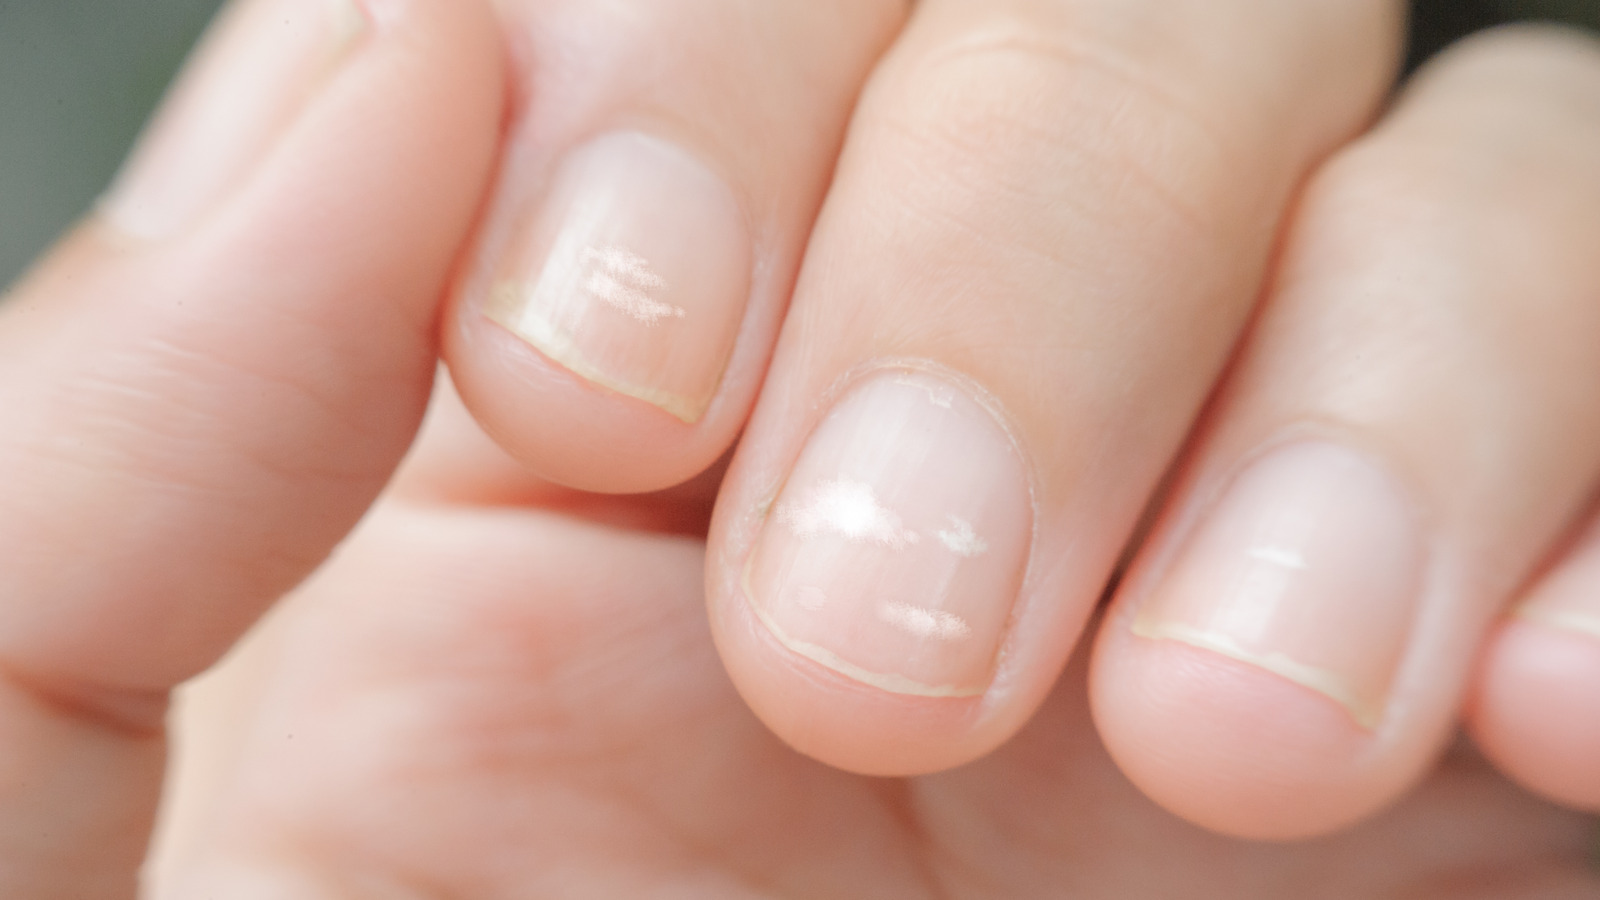 White Spots On Finger Nails Called Leukonychia Reveal The Emergence Of  Health Problems Stock Photo - Download Image Now - iStock